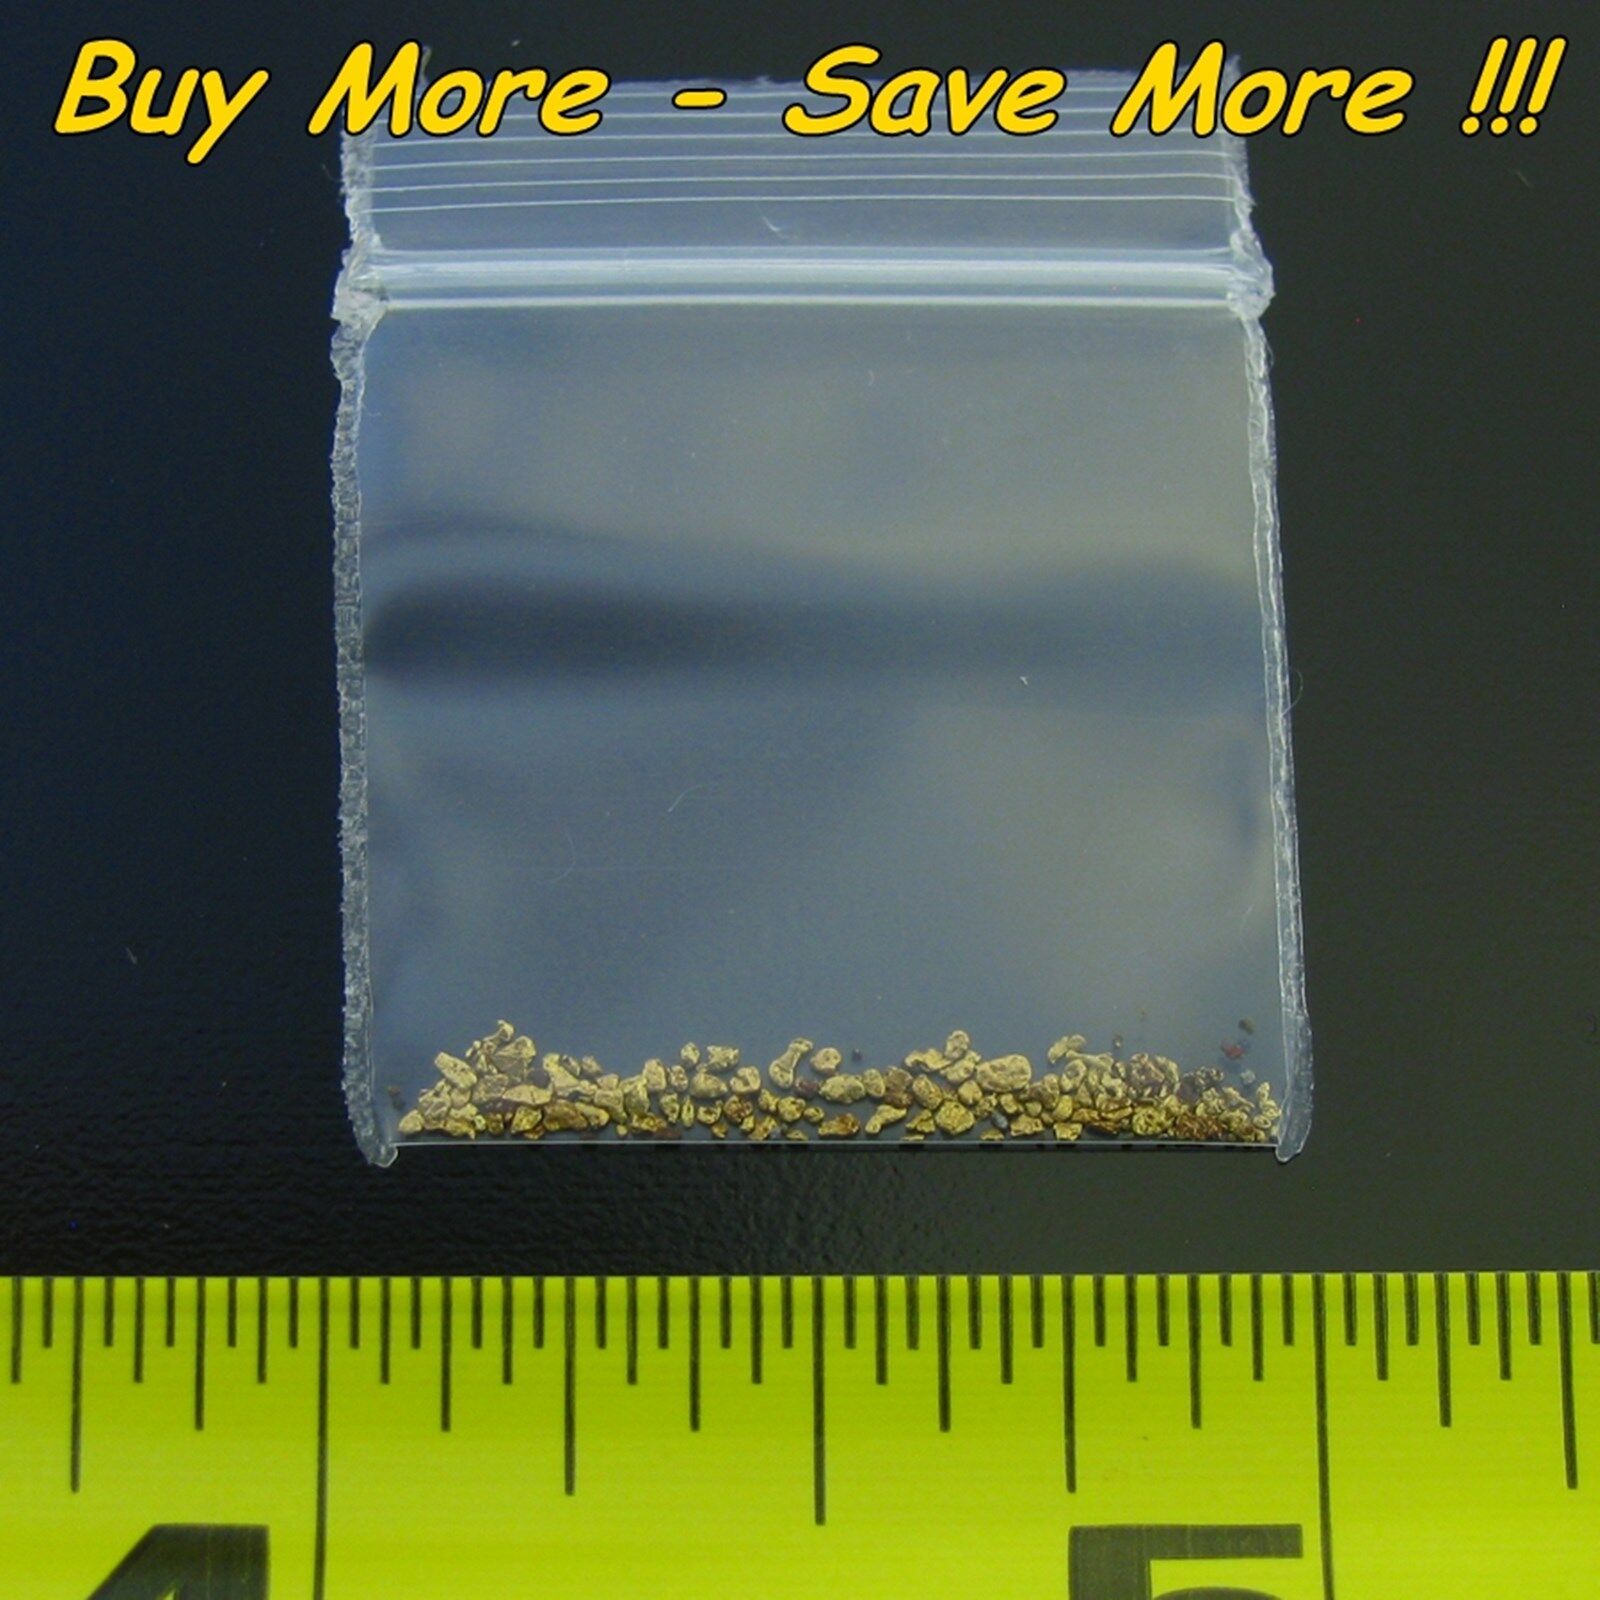 .145 Gram Natural Raw Alaskan Placer Gold Dust Fines Nugget Flake Paydirt 18-20k